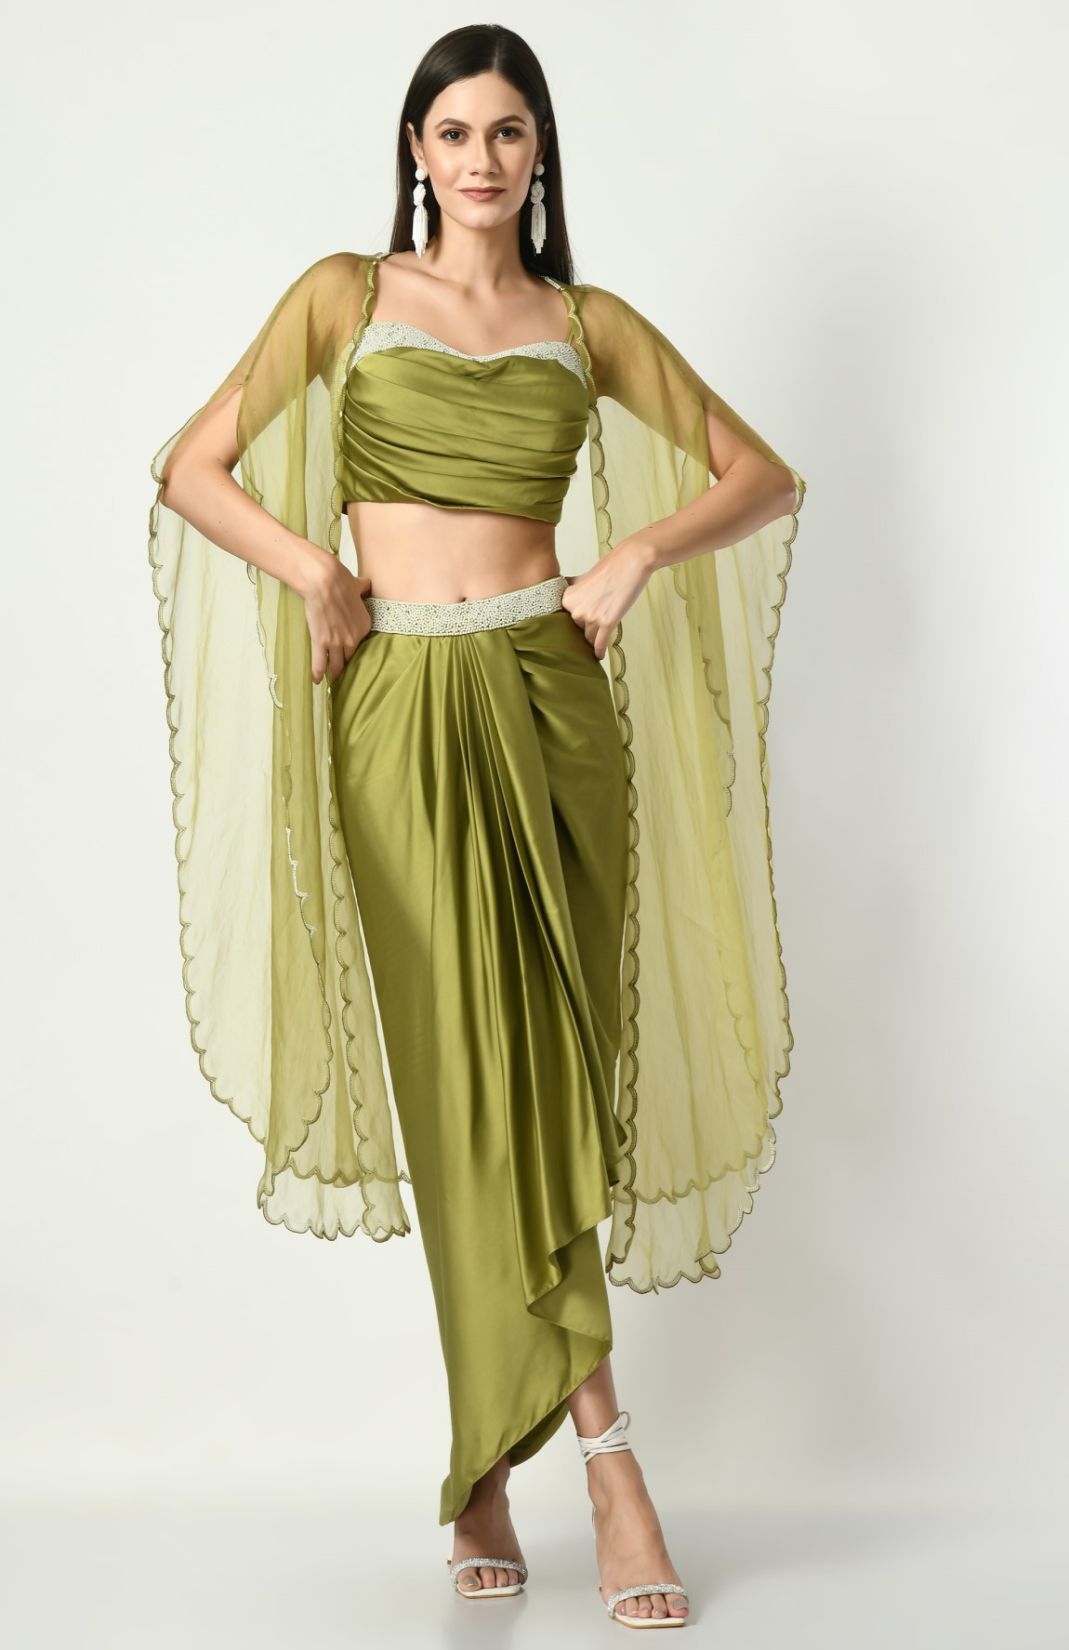 Draped Dhoti Skirt With Embroidered Belt & Cowl Blouse